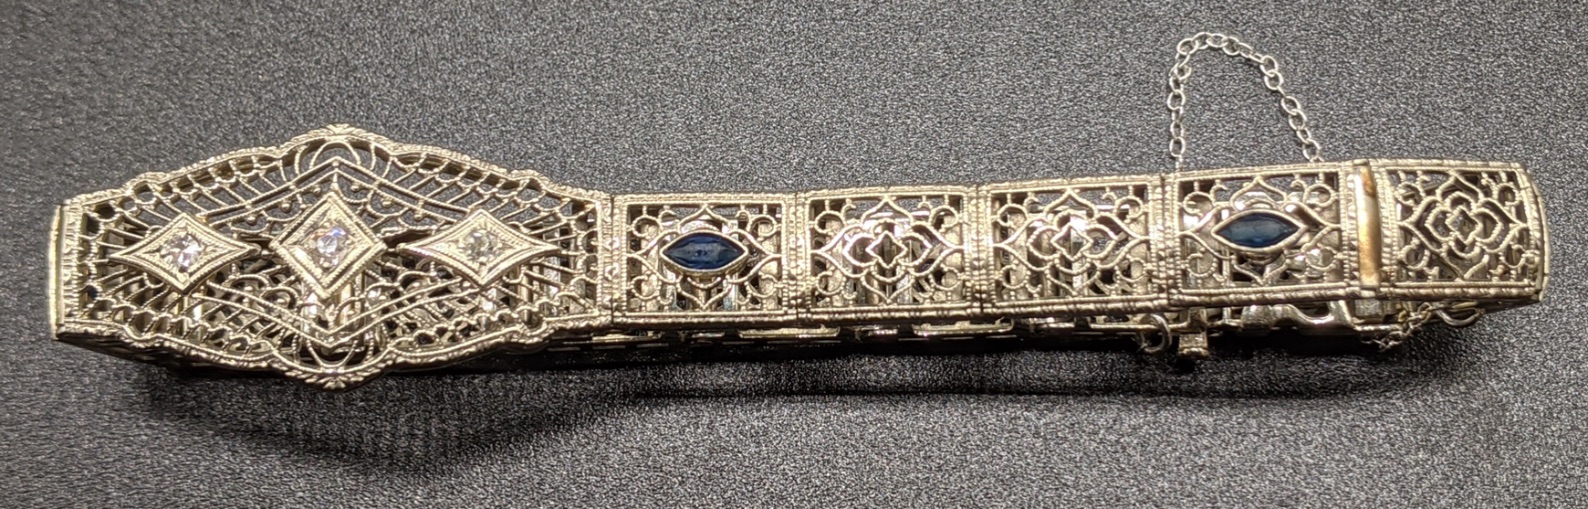 A 14ct white gold bracelet, mounted with 3 diamonds and 4 sapphires, 14g - Image 3 of 4